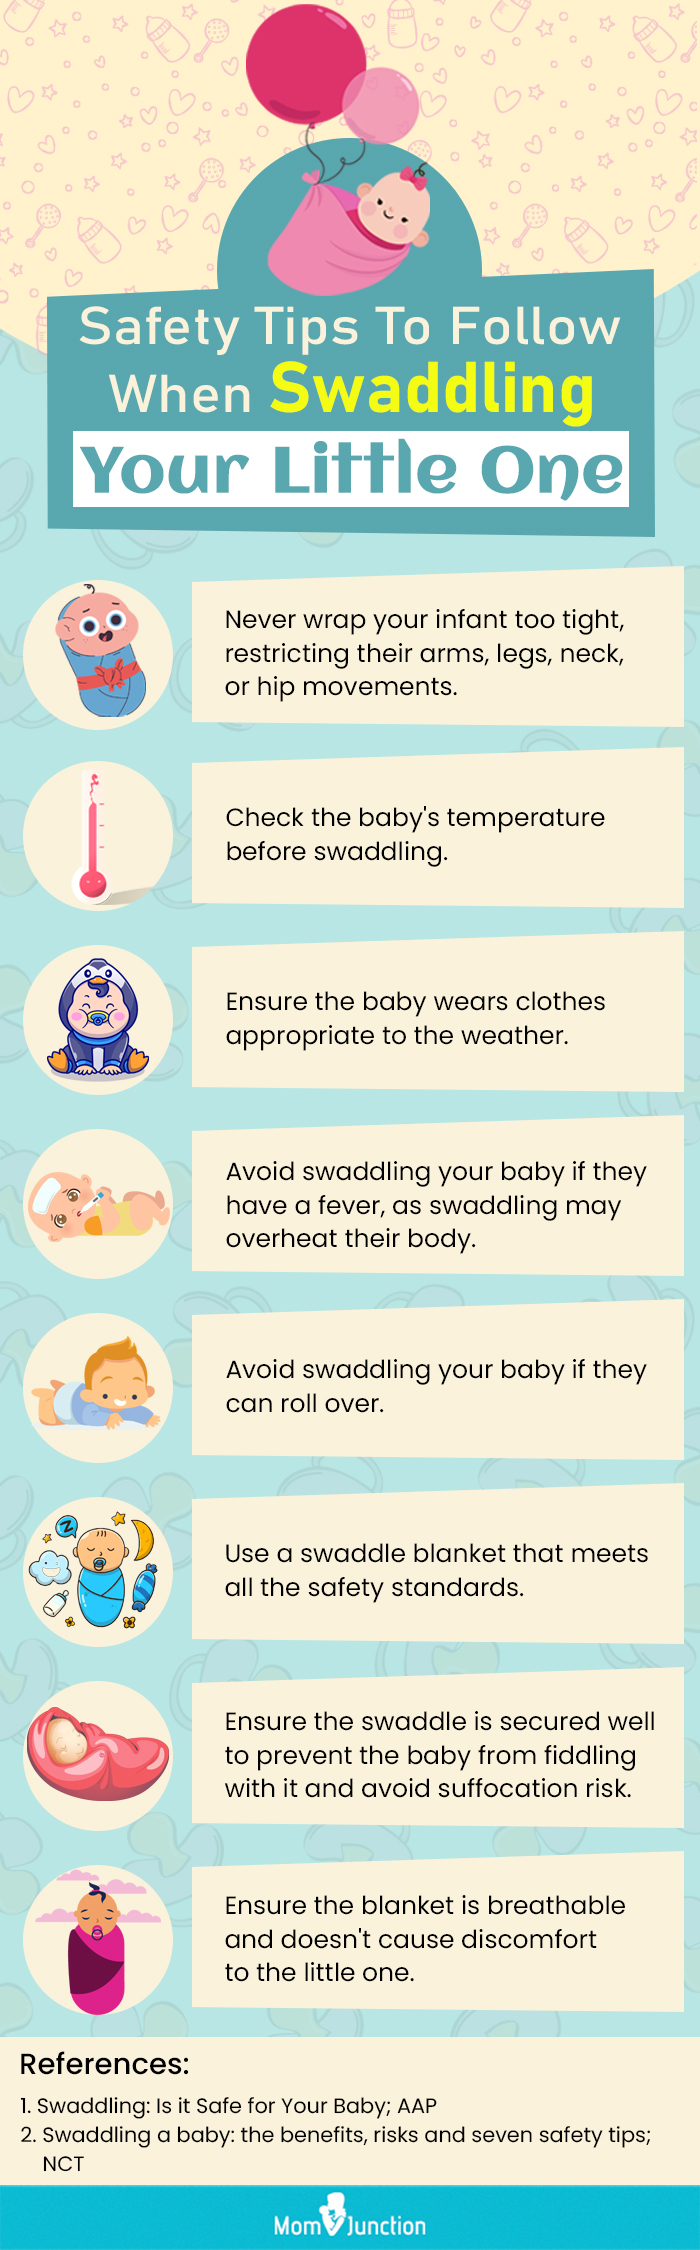 Safety Tips To Follow When Swaddling Your Little One